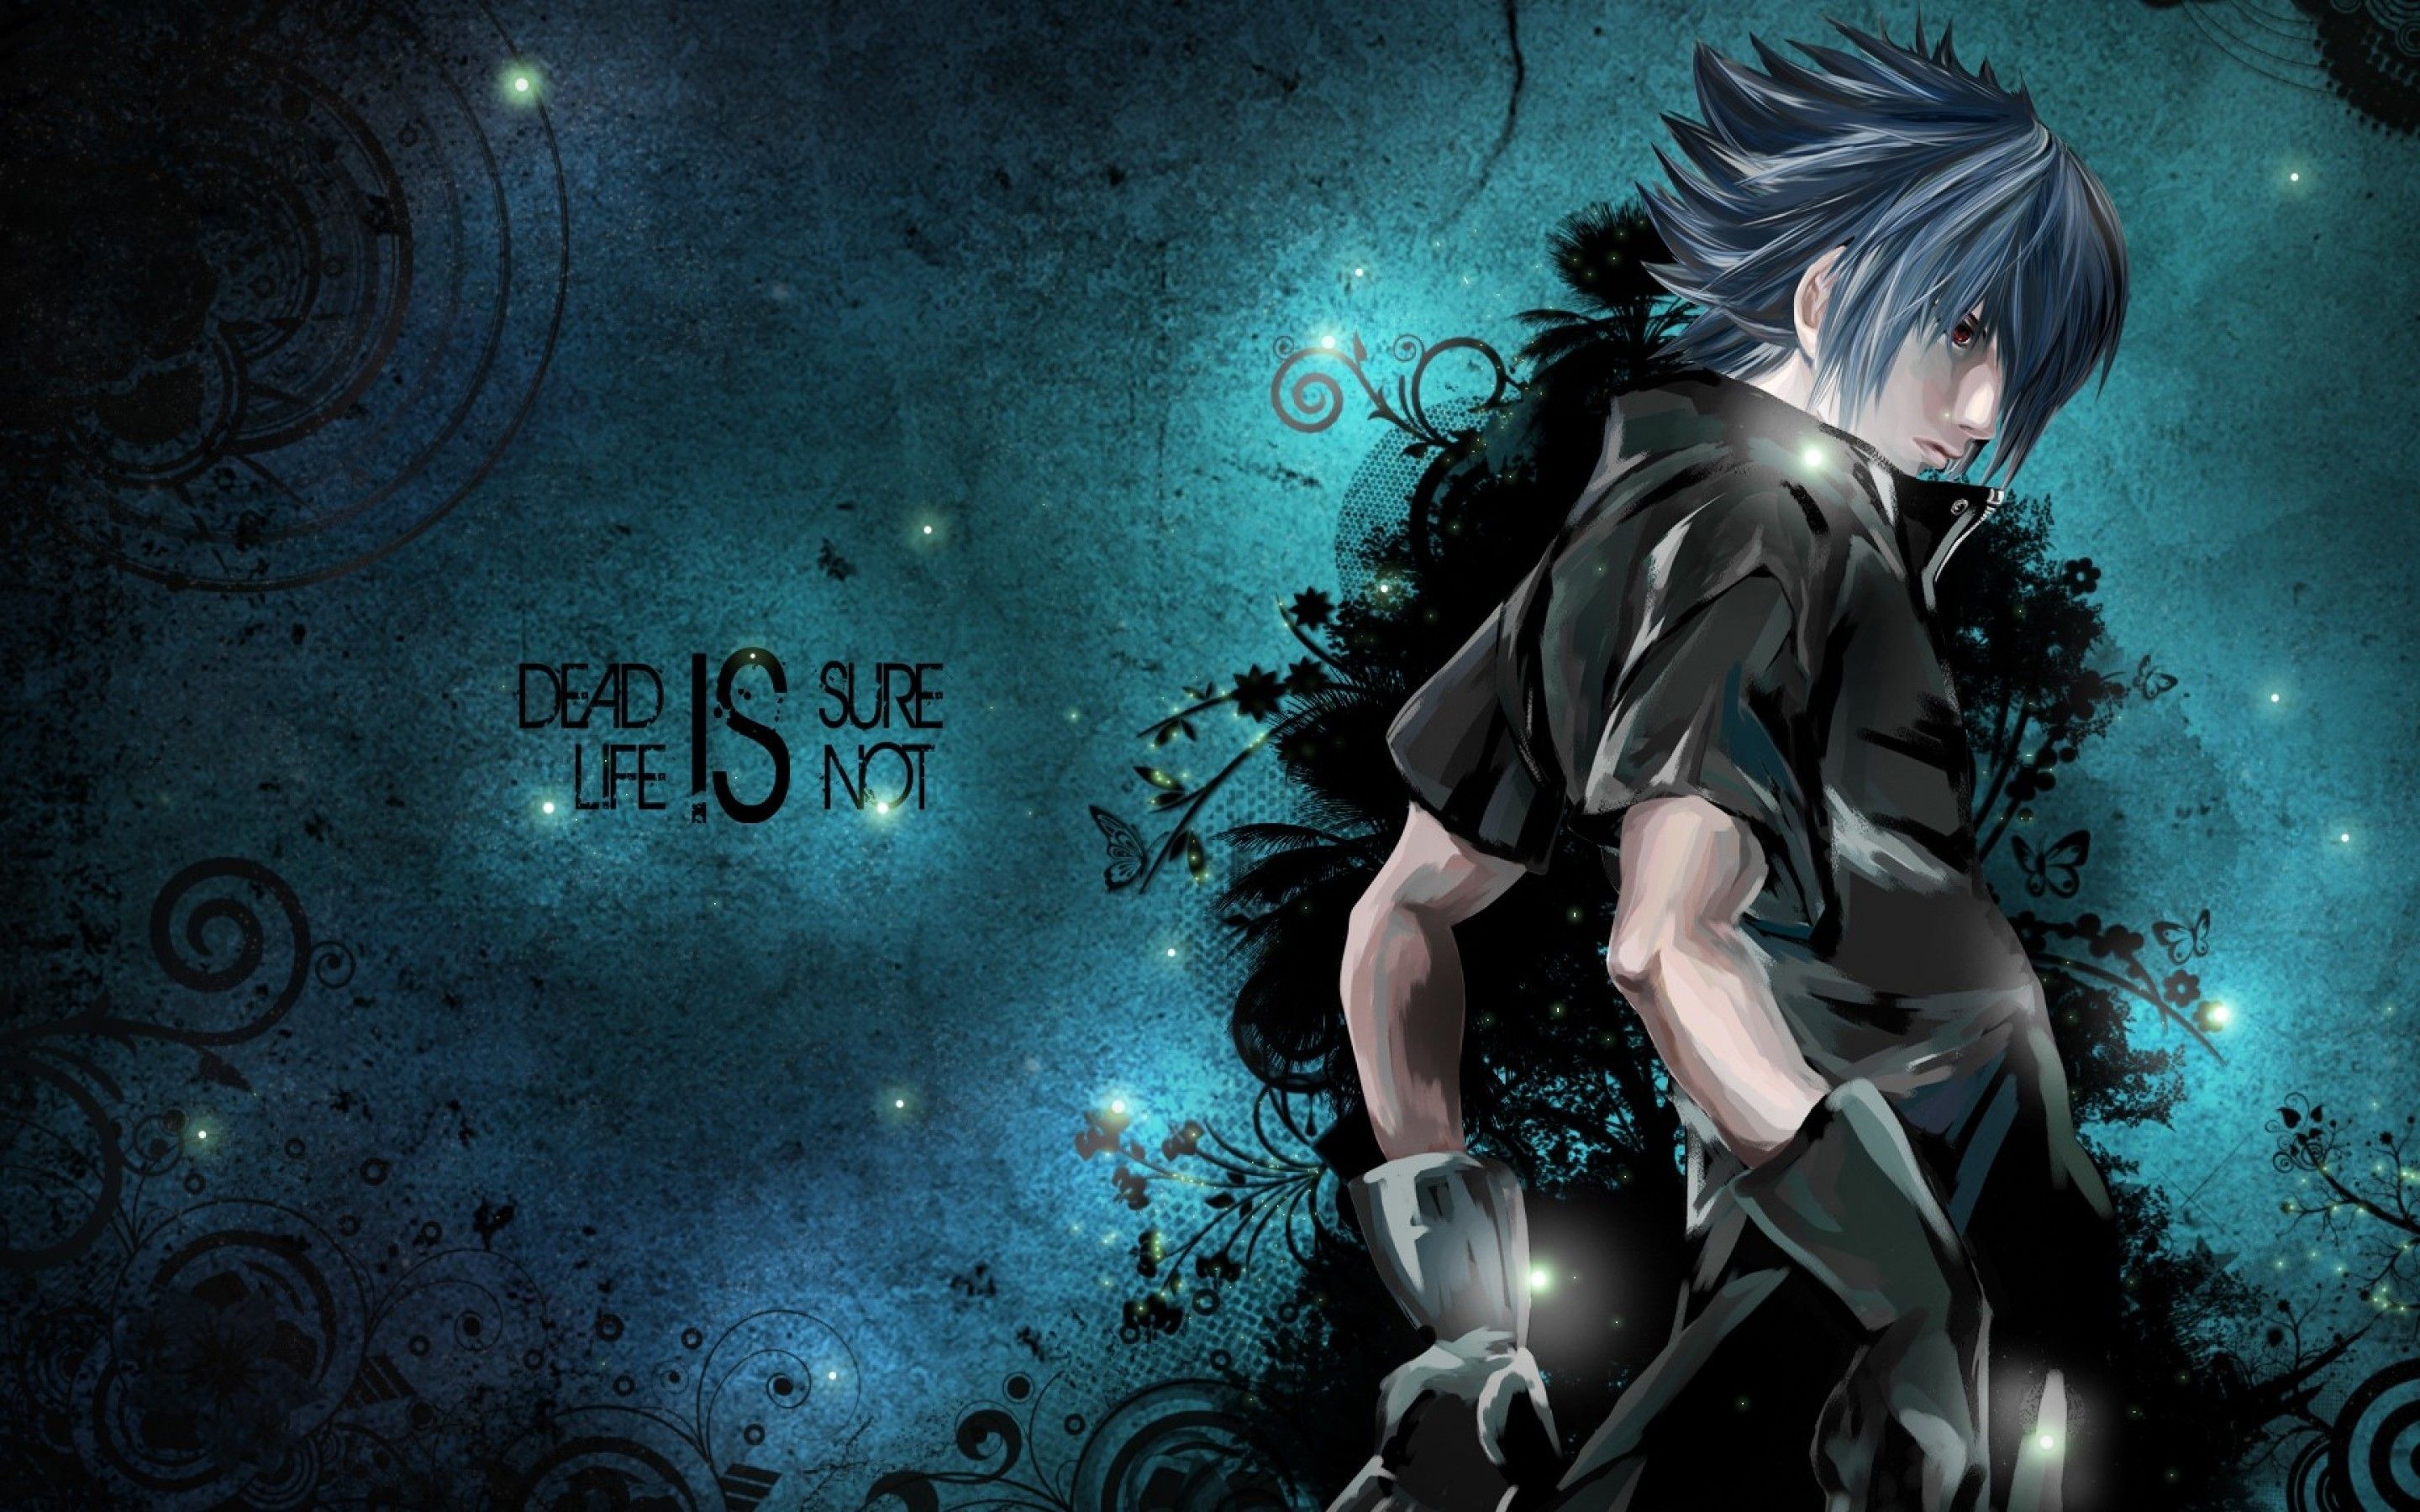 Awesome Anime Image. Anime wallpaper download, HD anime wallpaper, Cool anime background